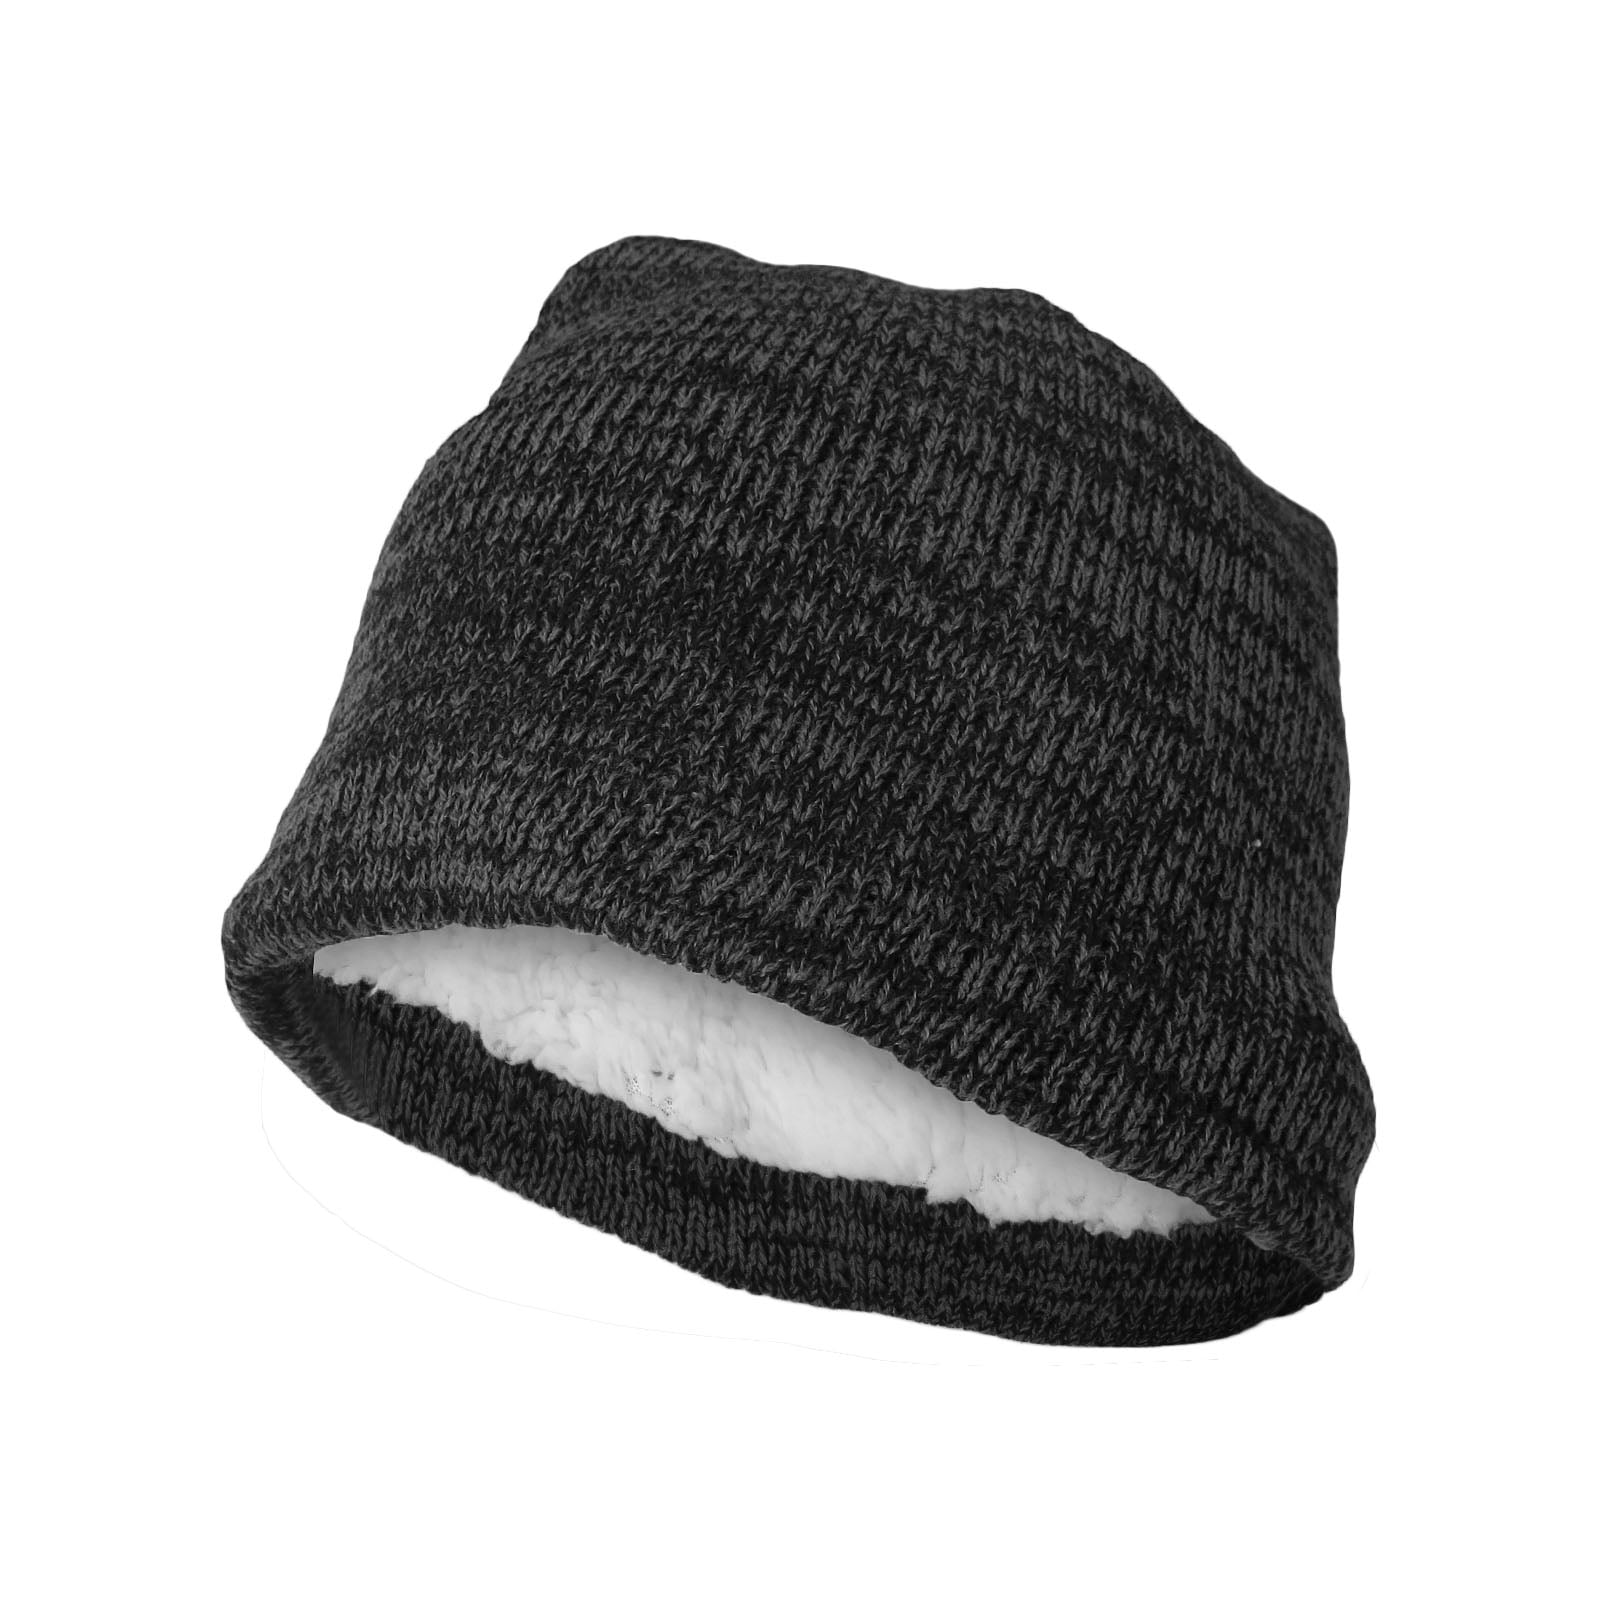 Winter Cable Knit hat Wool Knitted Bucket Hats Warm Soft Cloche Cap Witch Halloween caps Women 